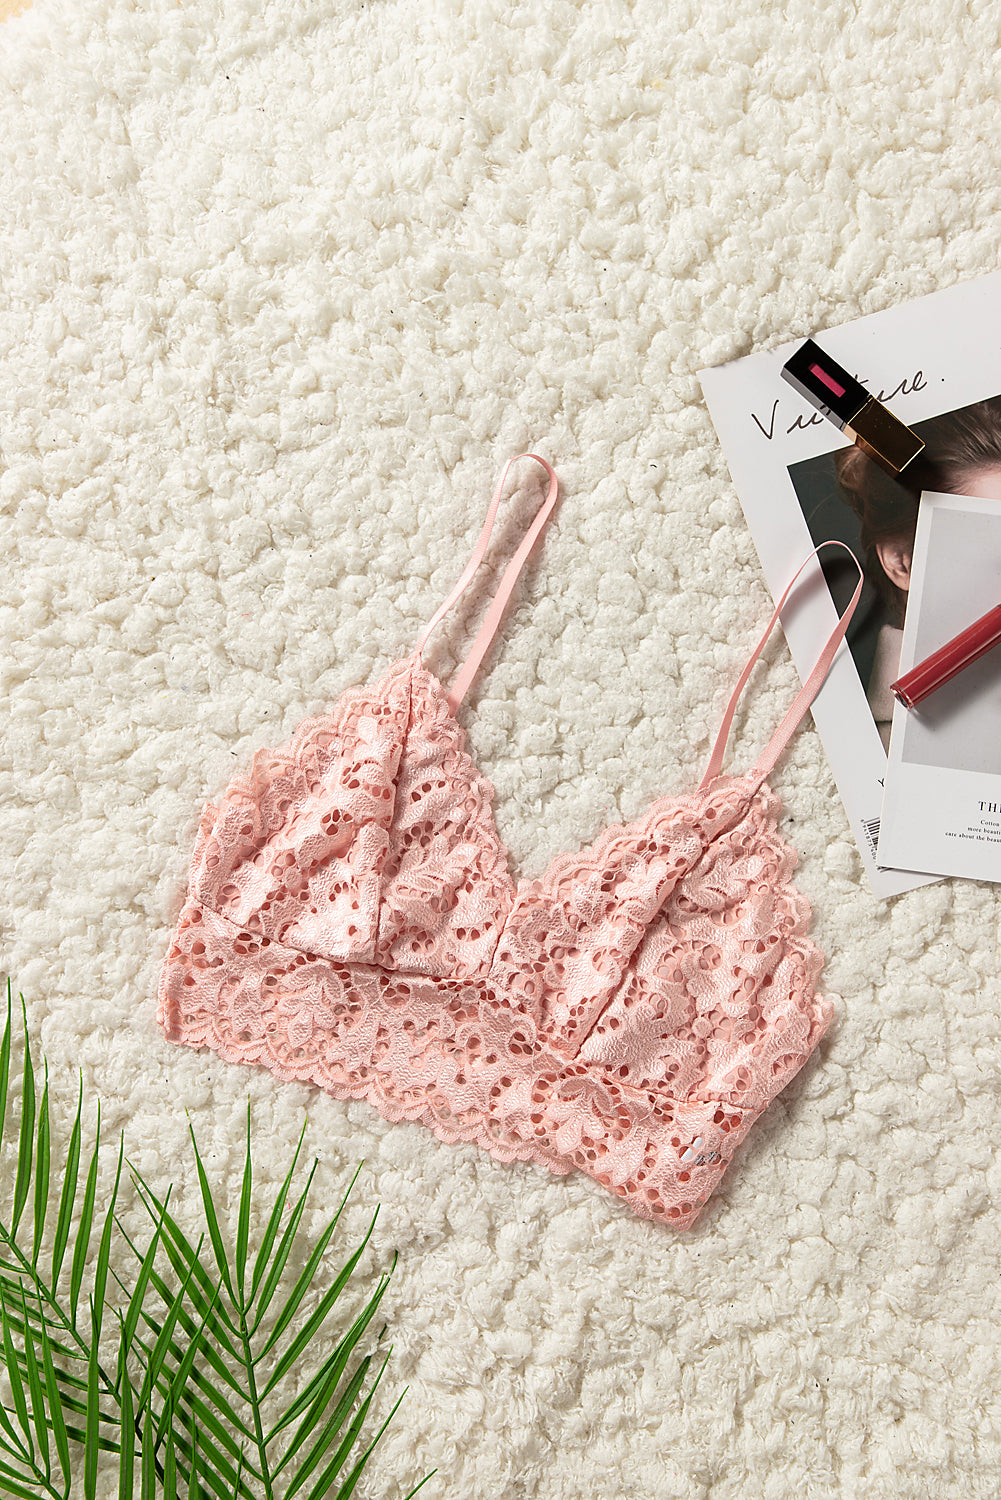 Crochet bralette crop top with lining